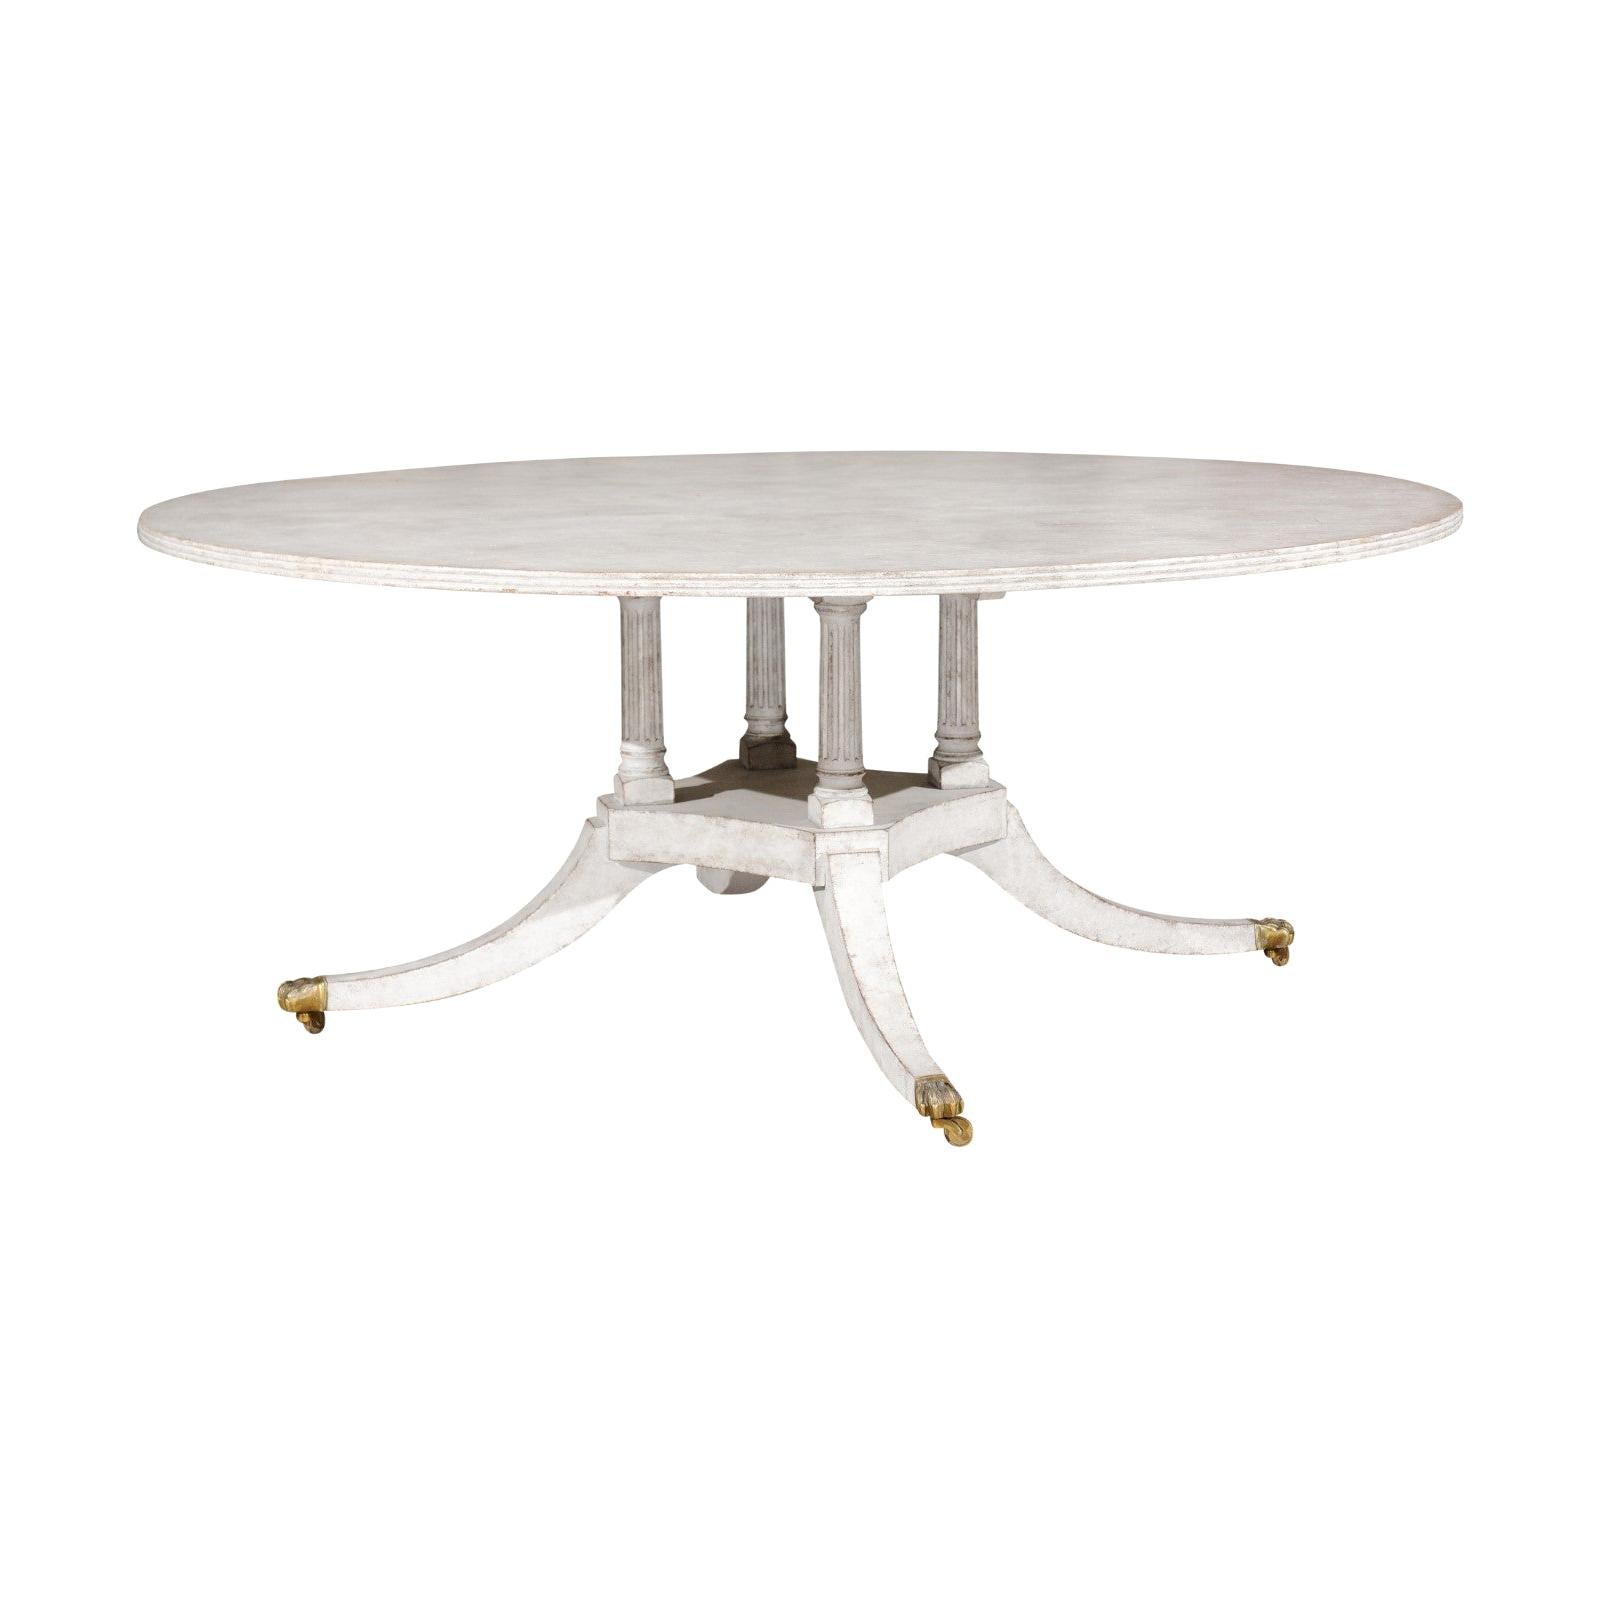 Regency Style Painted Wood Round Top Table with Brass Paw Feet and Casters